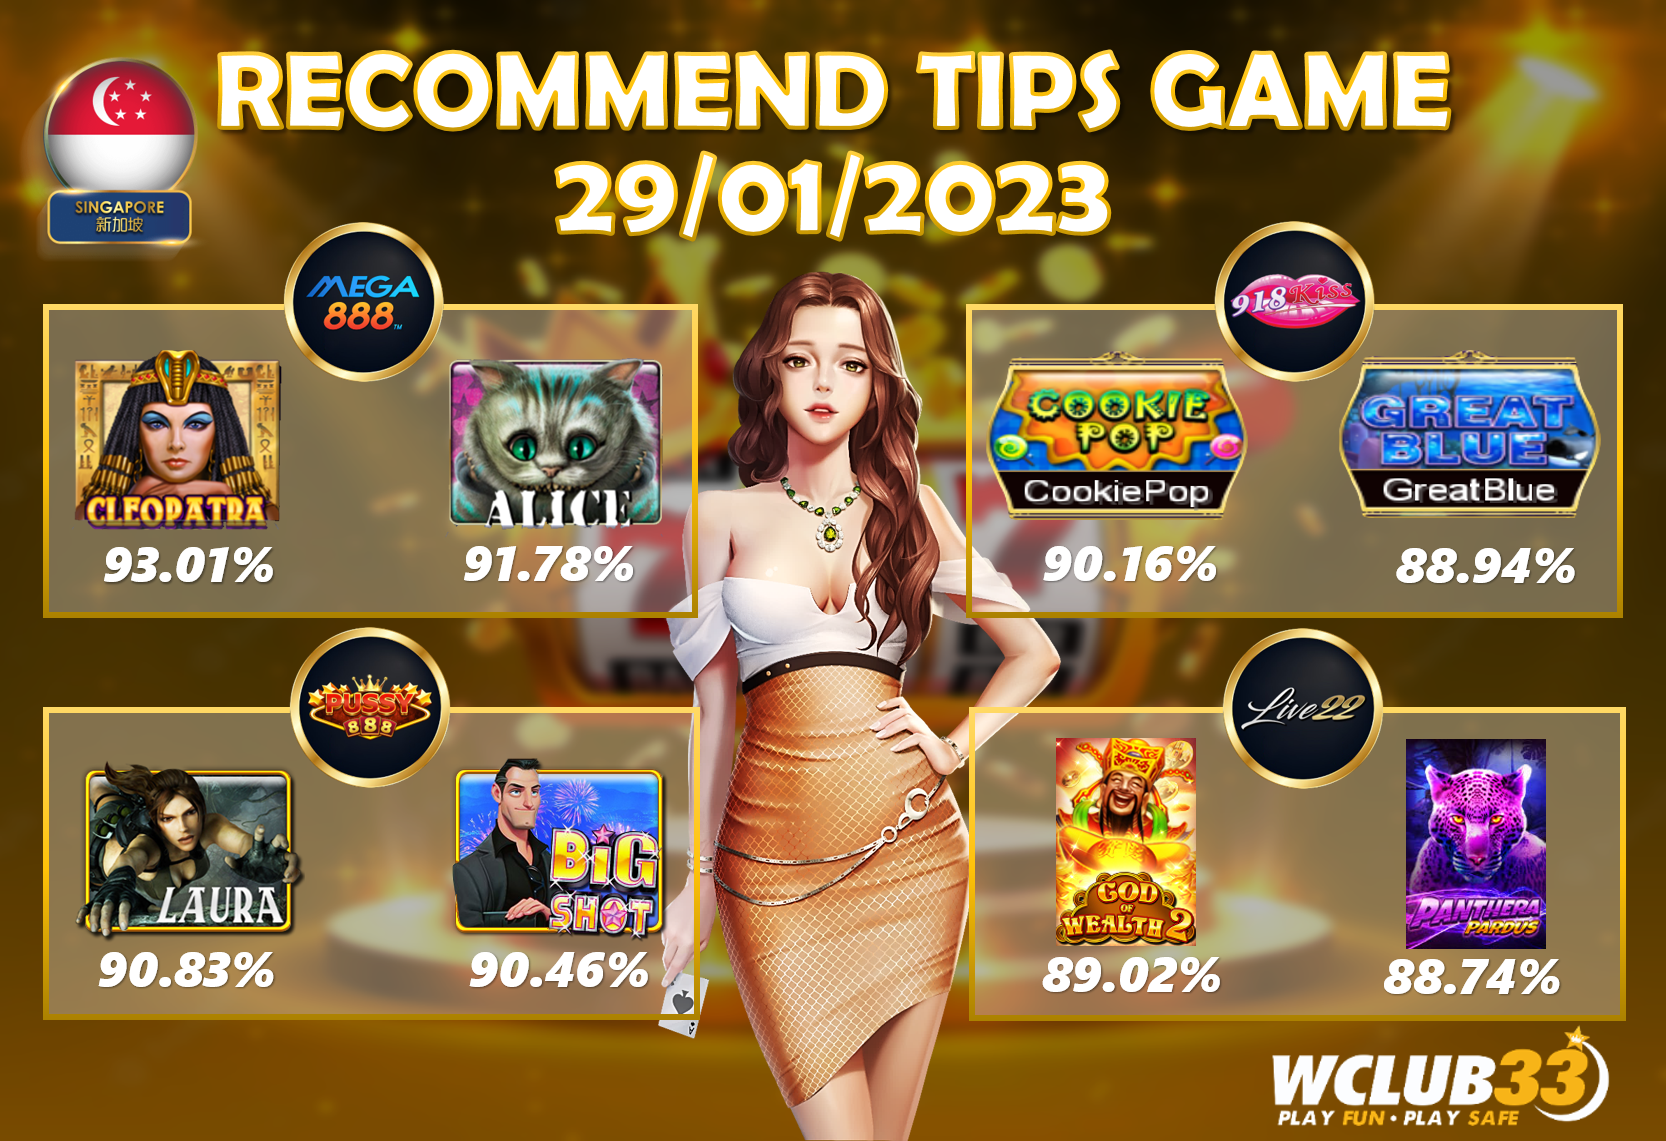 UPDATE TIPS GAME 29/01